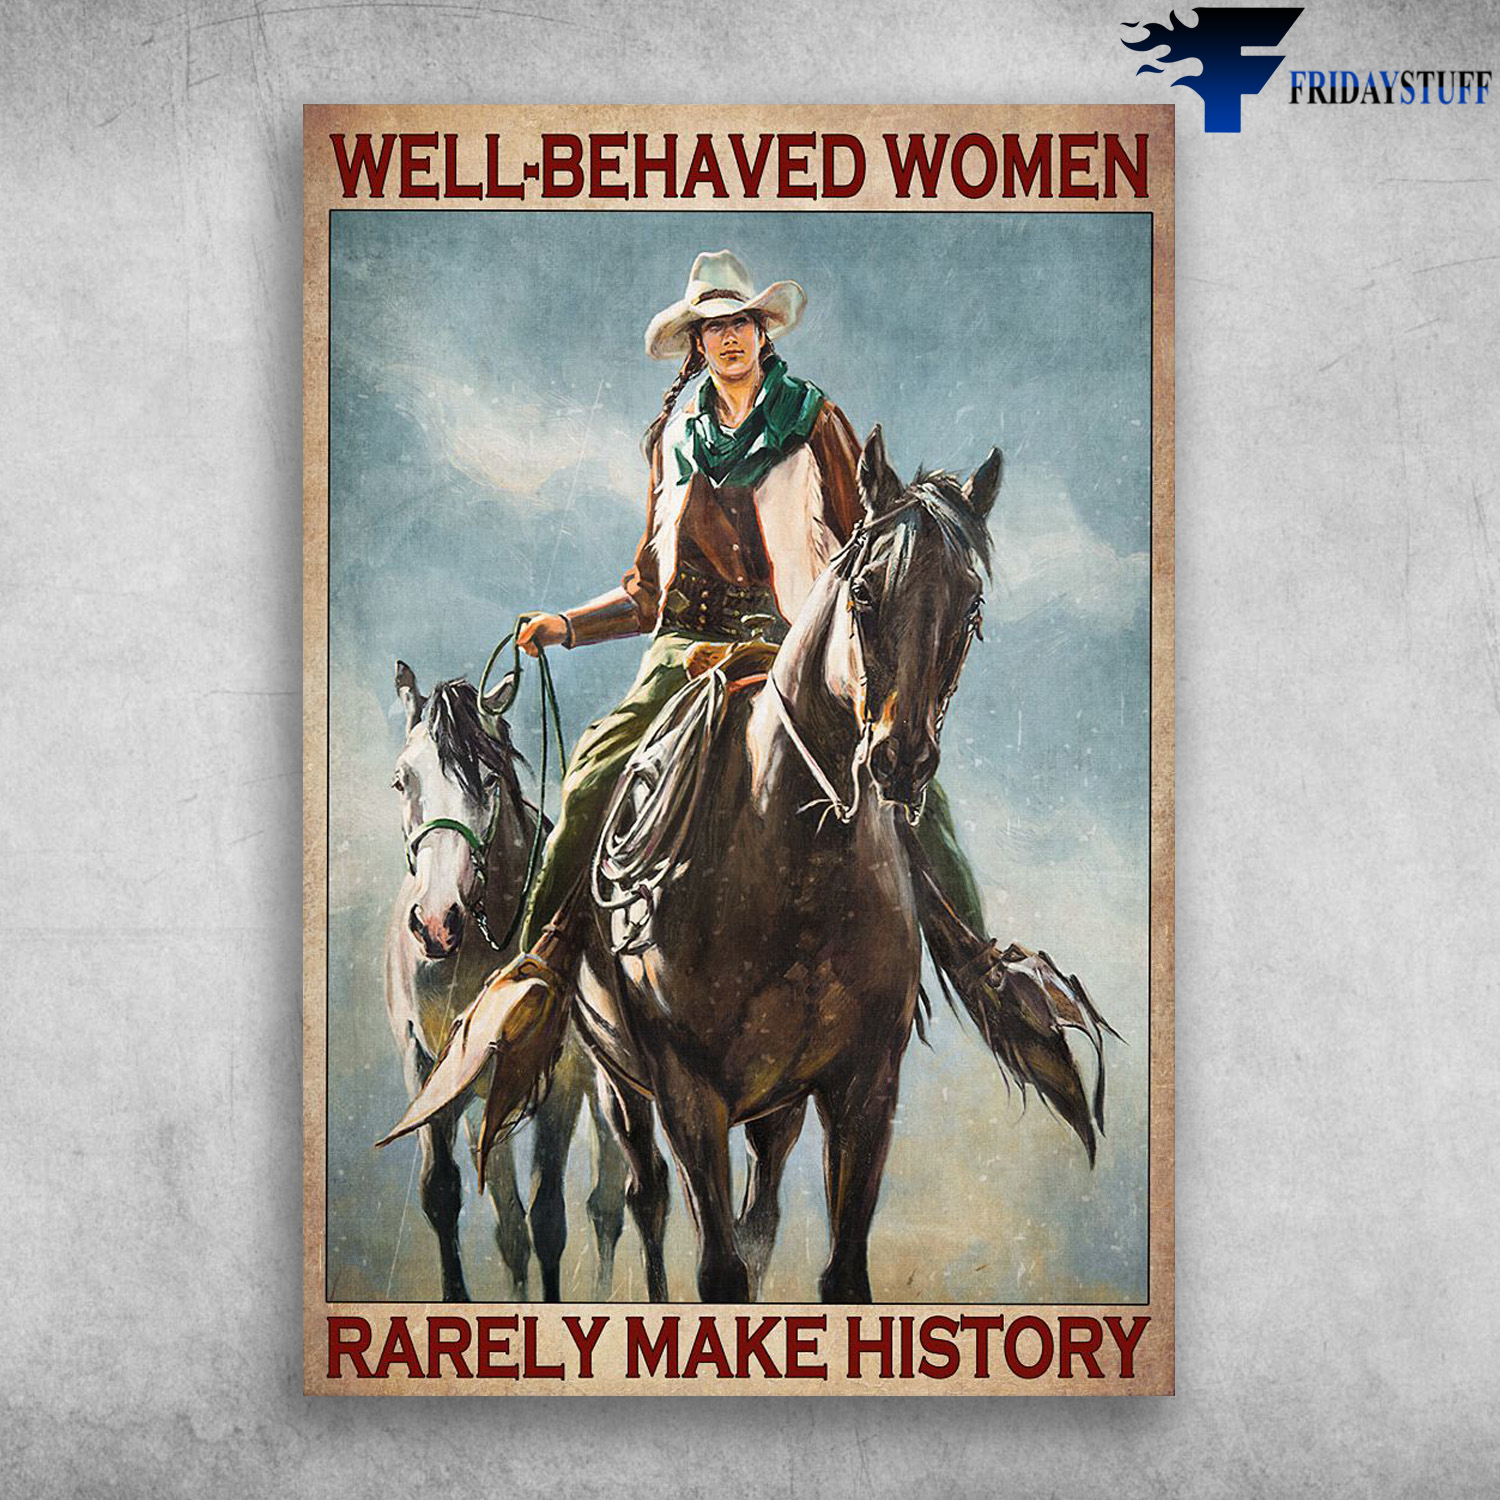 Cowgirl And The Horses - Well-Behaved Women, Rarely Make History